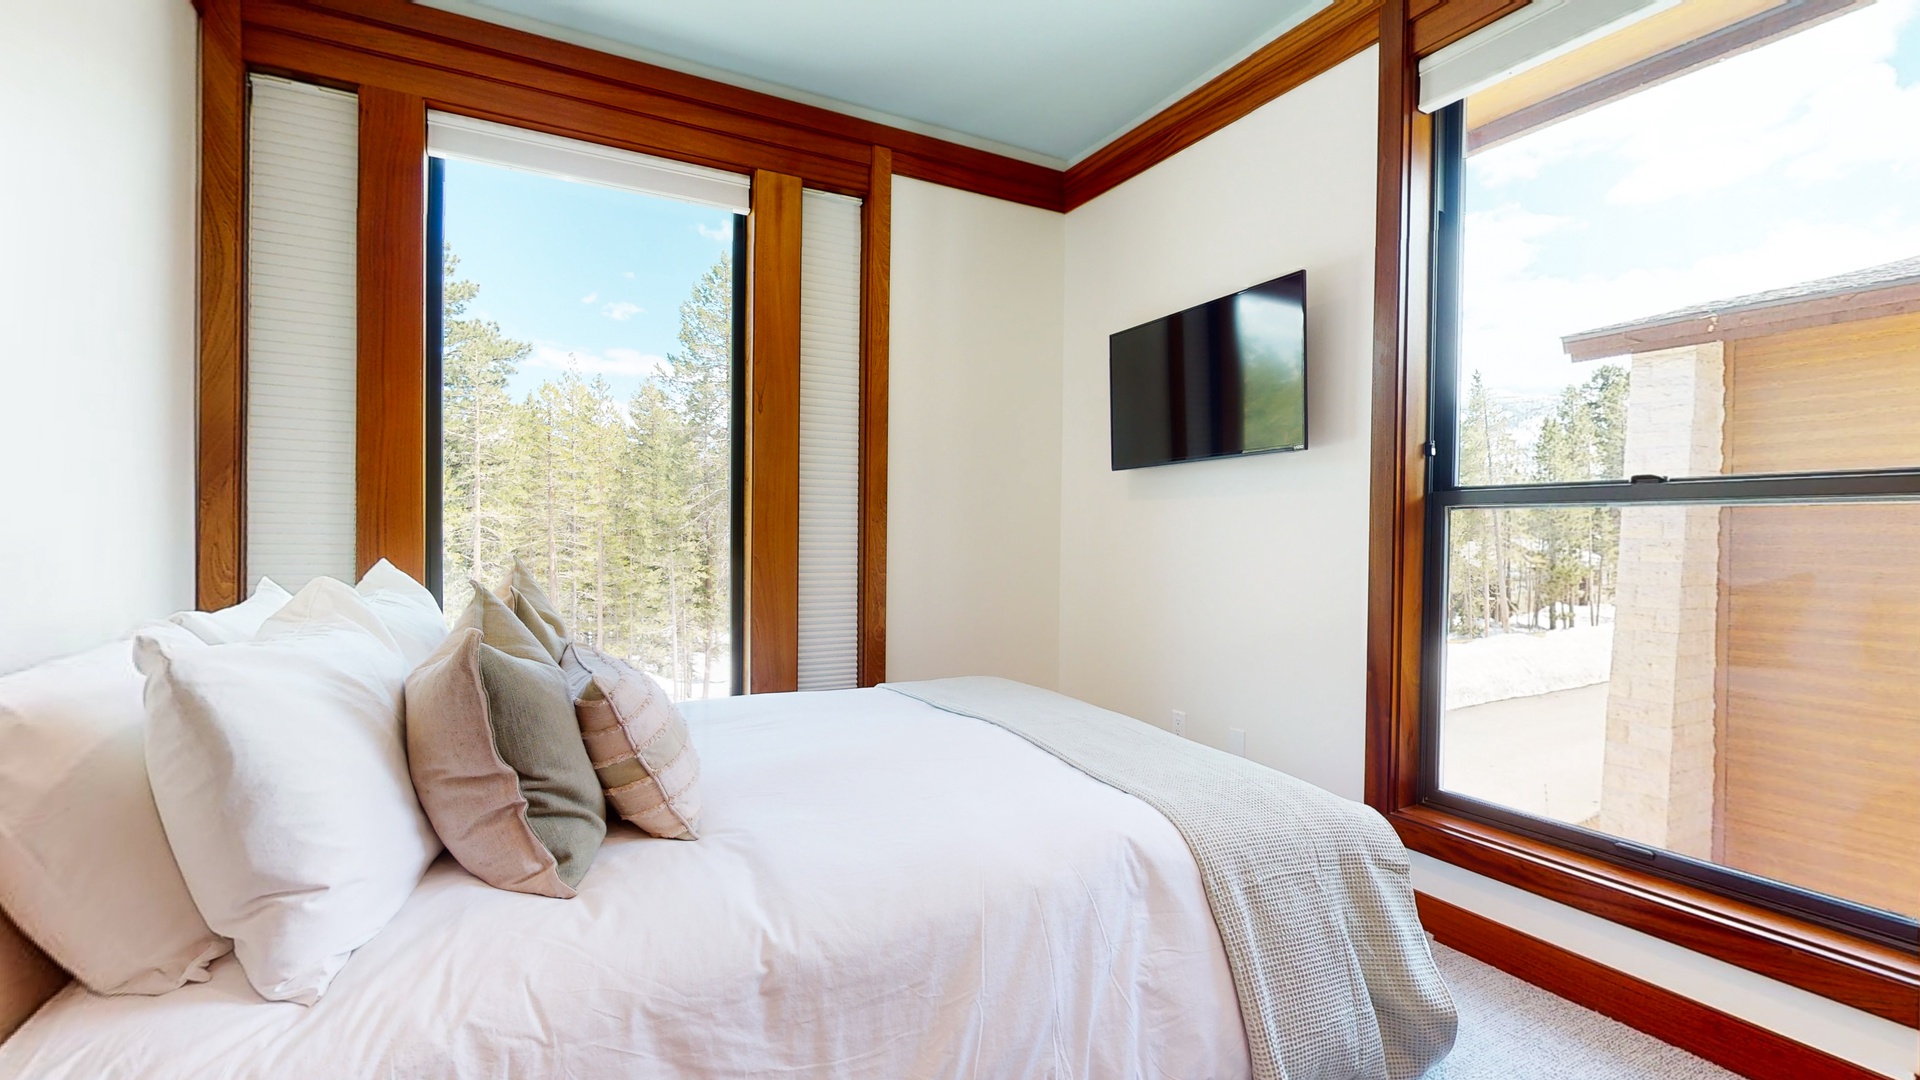 The 3rd floor queen bedroom boasts serene nature views and a Smart TV